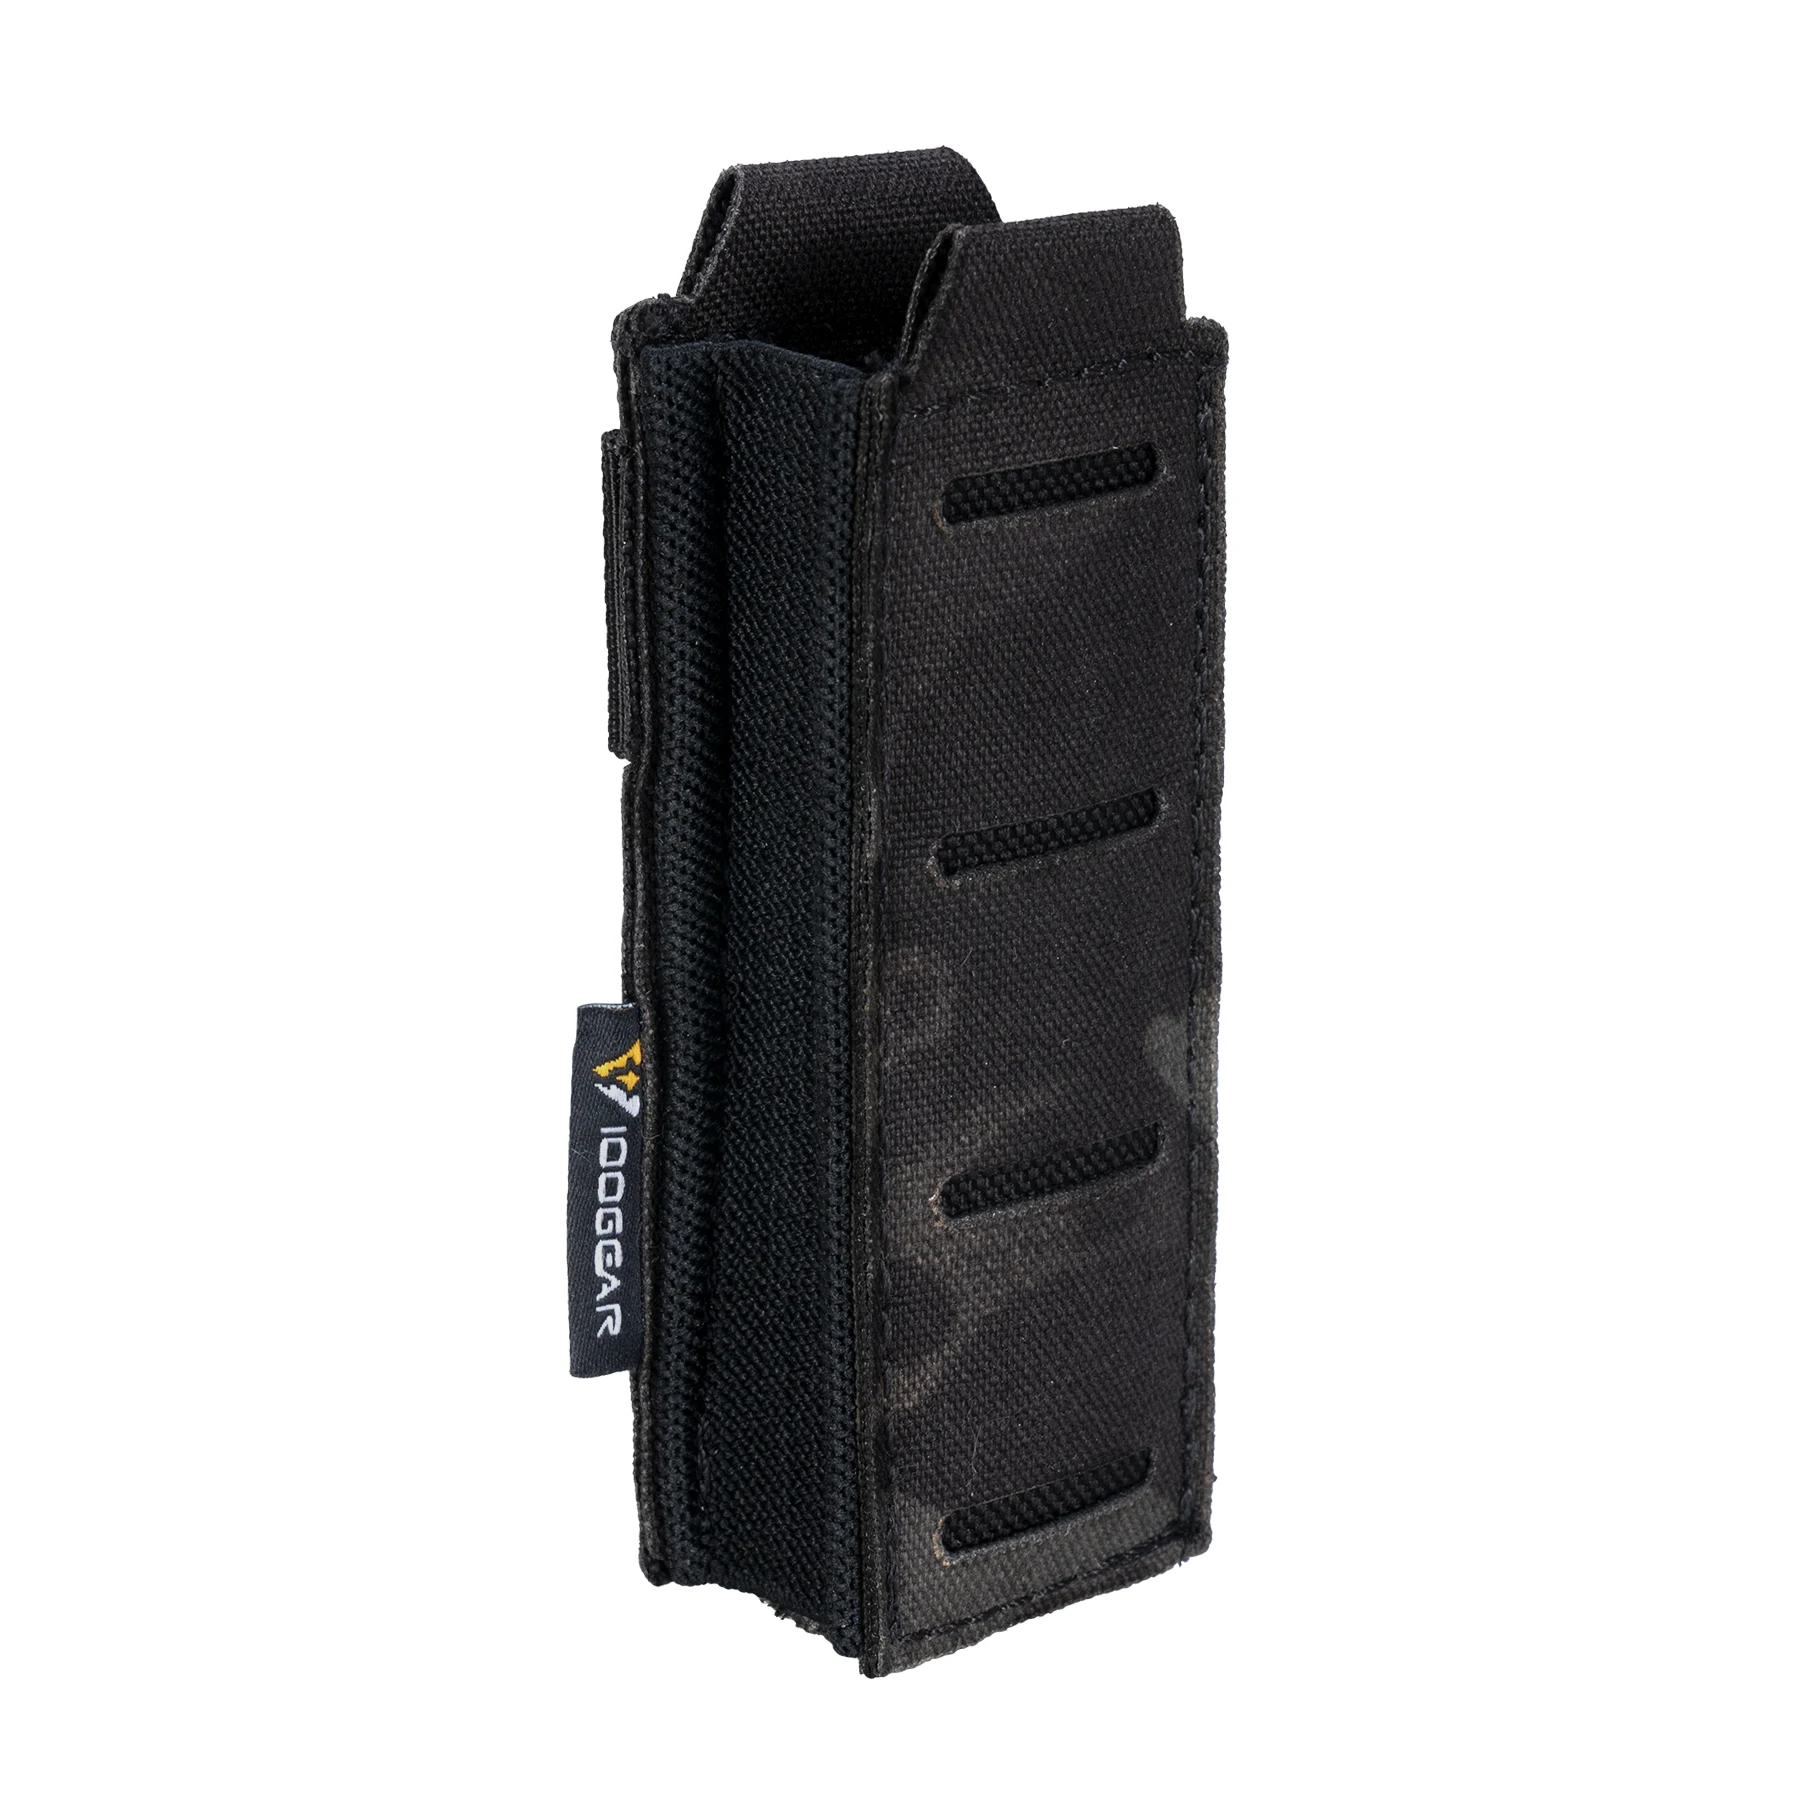 

IDOGEAR Laser Cut Tactical Single Magazine Pouch Camo Molle Tactical Mag Pouch for 9mm Mags